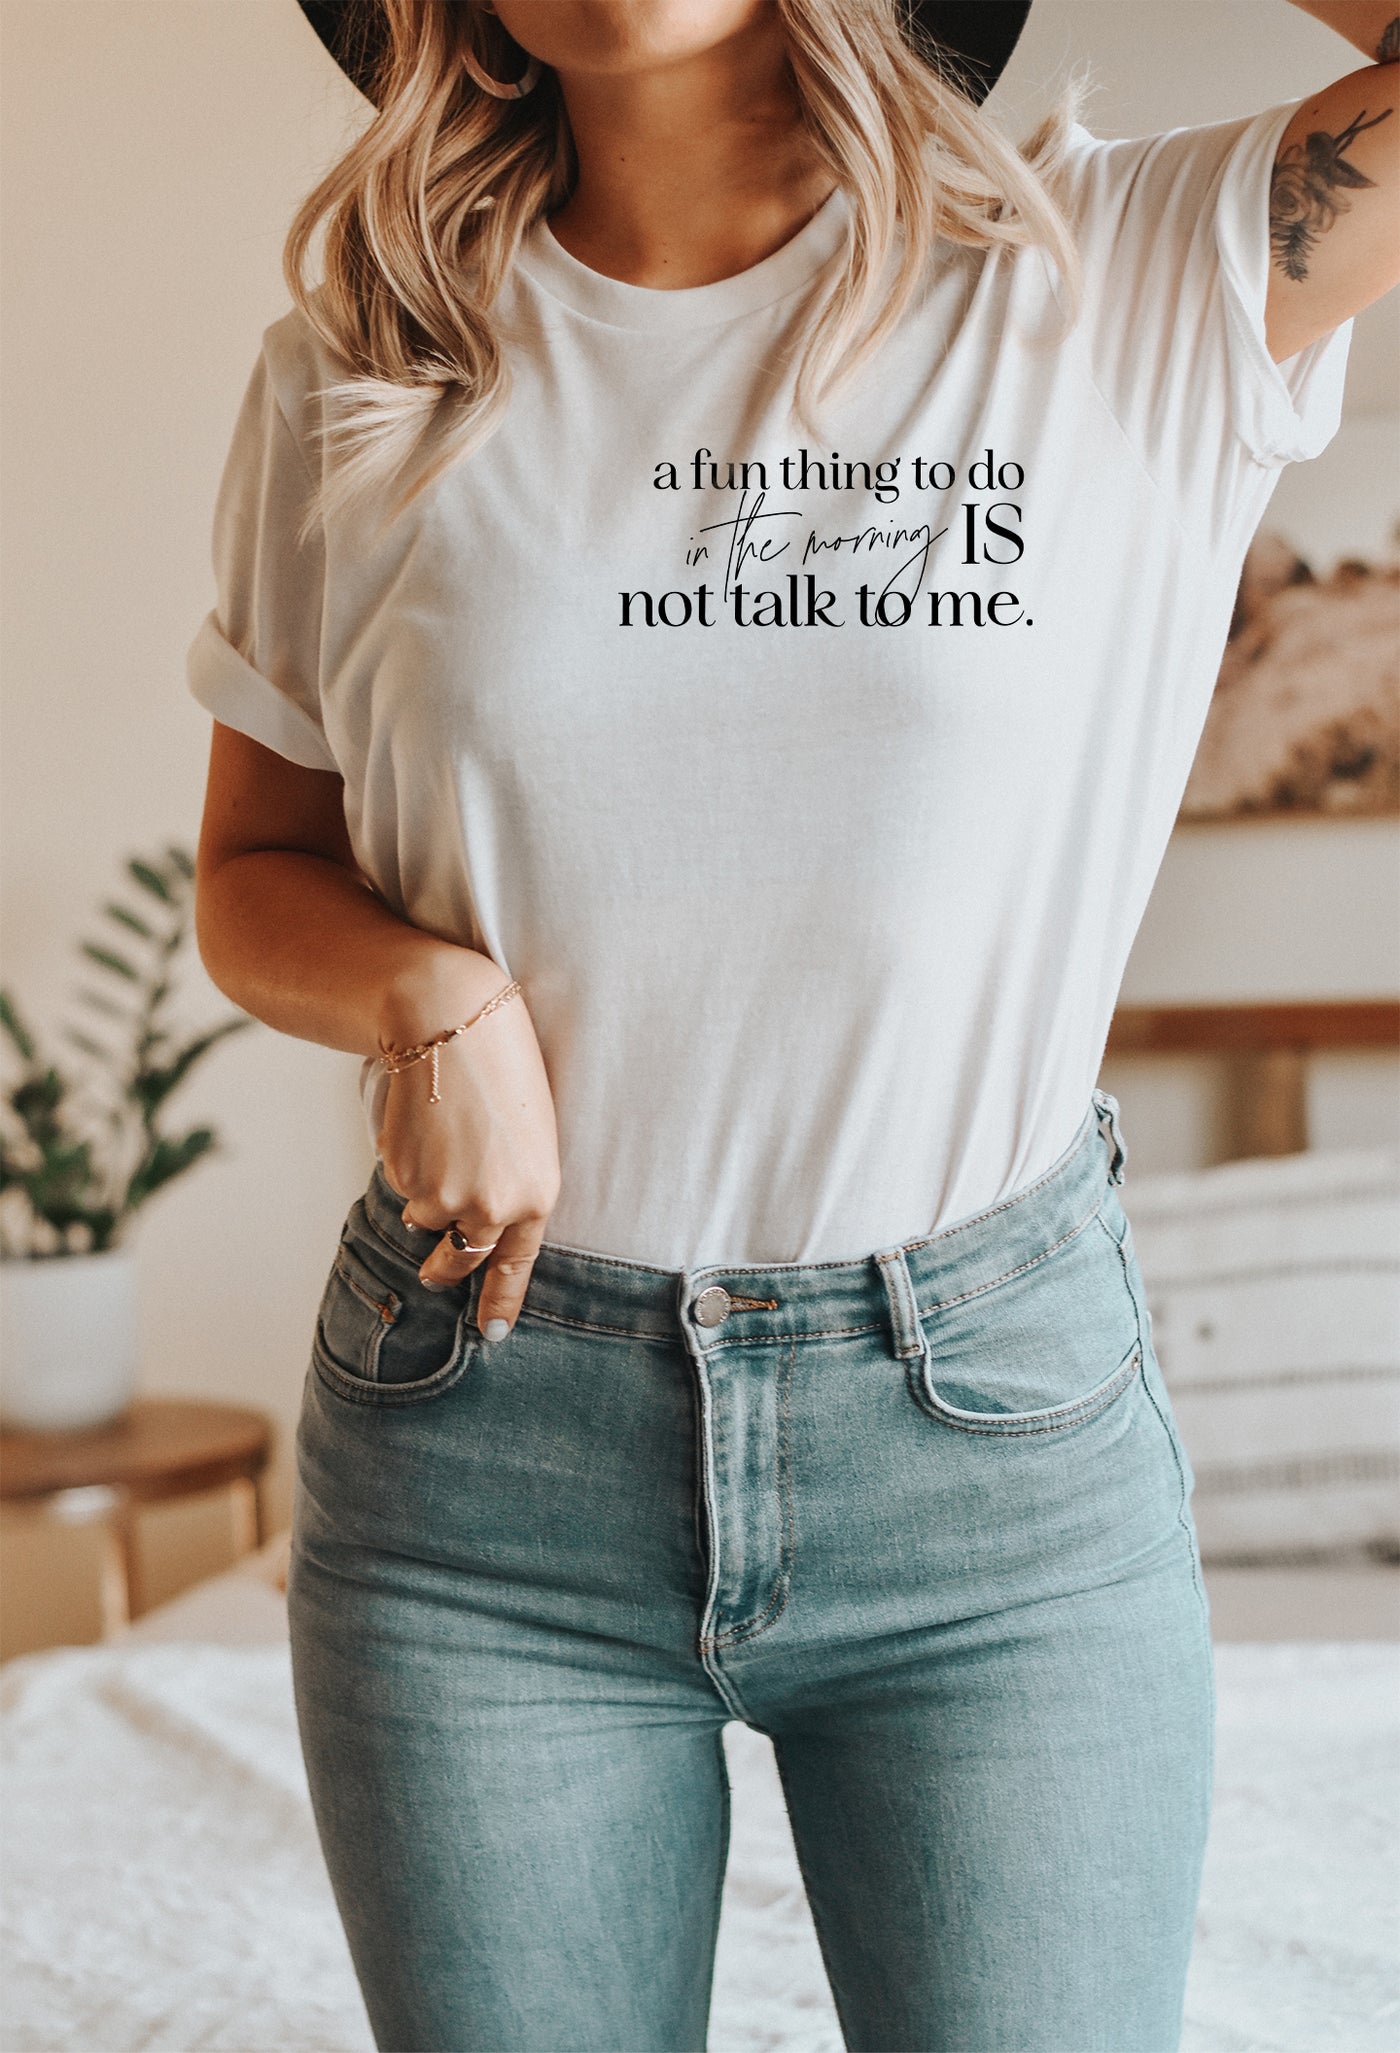 A Fun Thing To Do In the Morning Is Not Talk To Me Tee